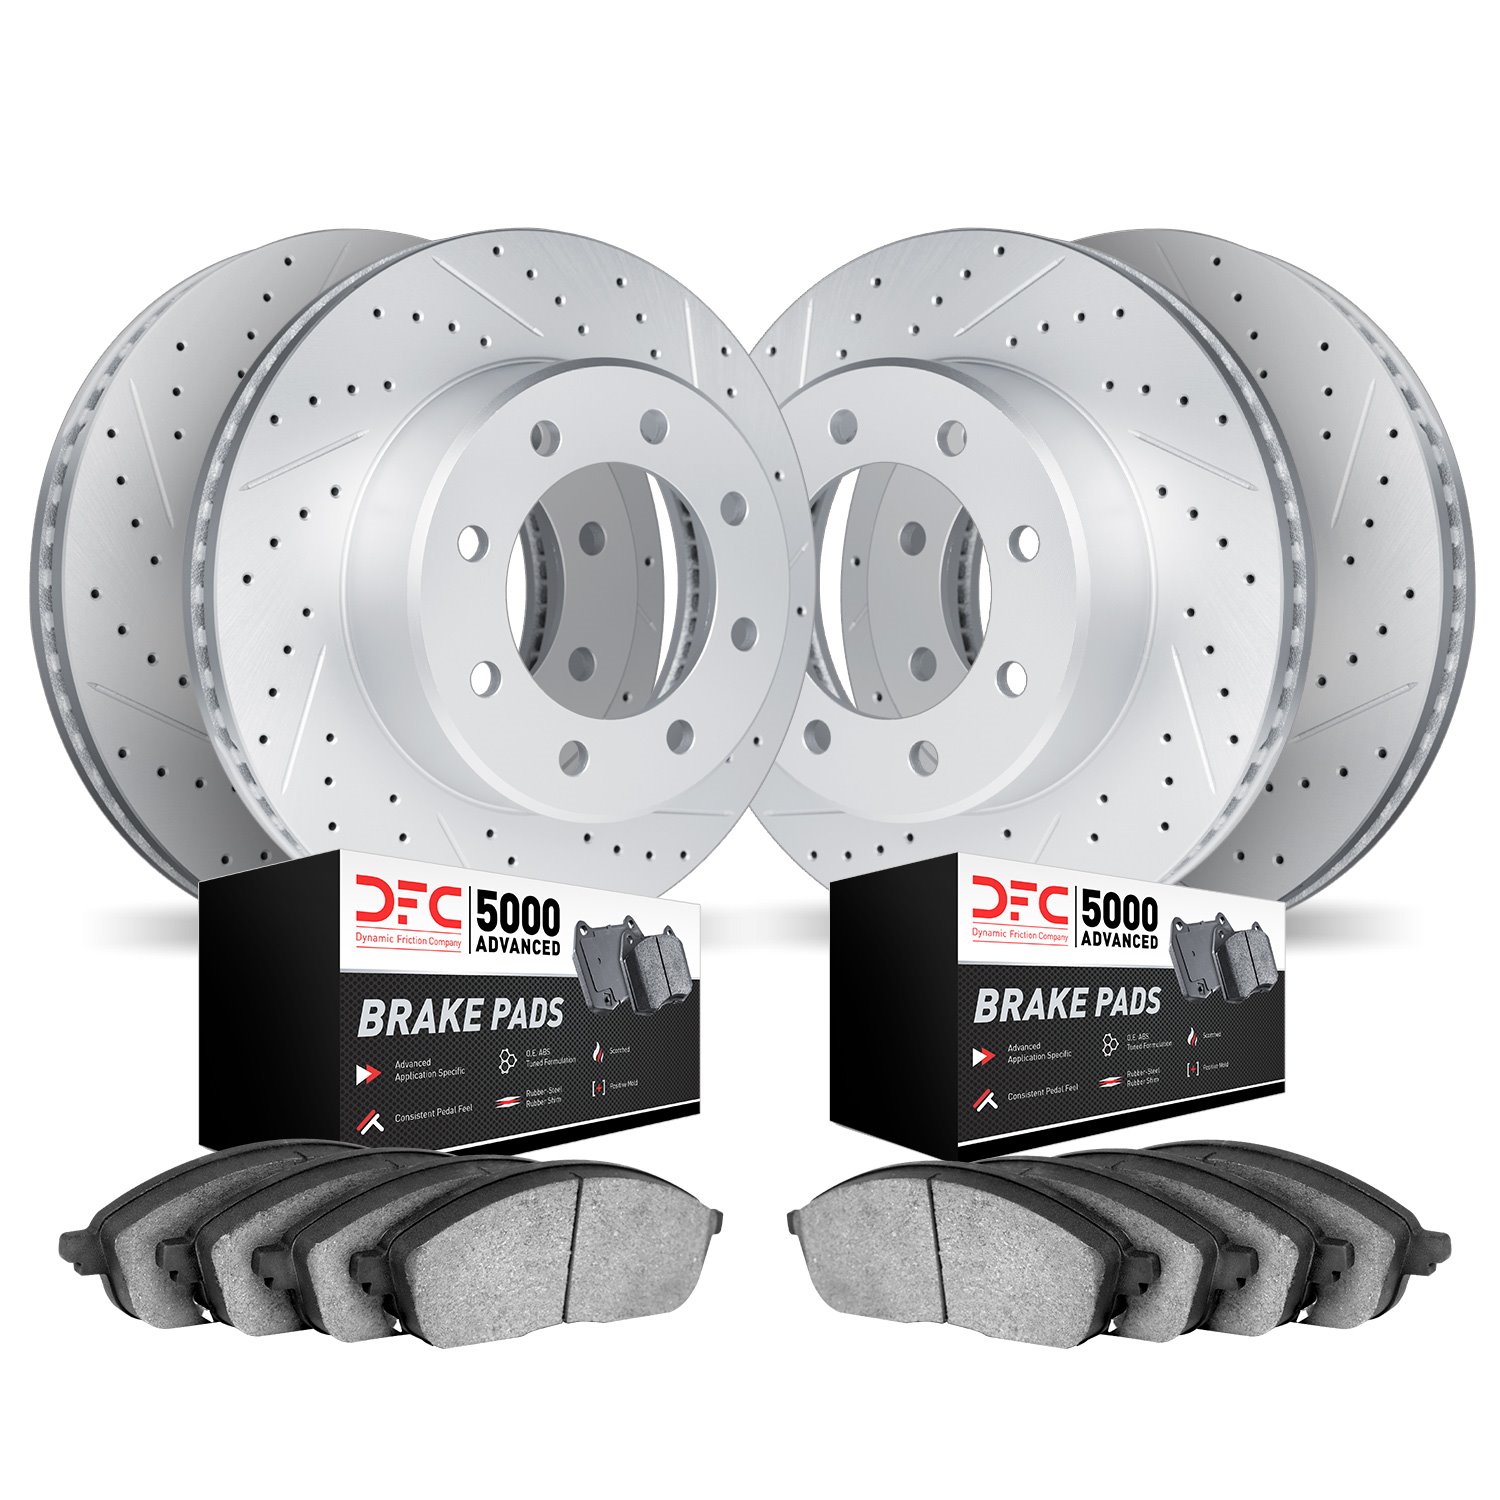 2504-54280 Geoperformance Drilled/Slotted Rotors w/5000 Advanced Brake Pads Kit, 2005-2007 Ford/Lincoln/Mercury/Mazda, Position: